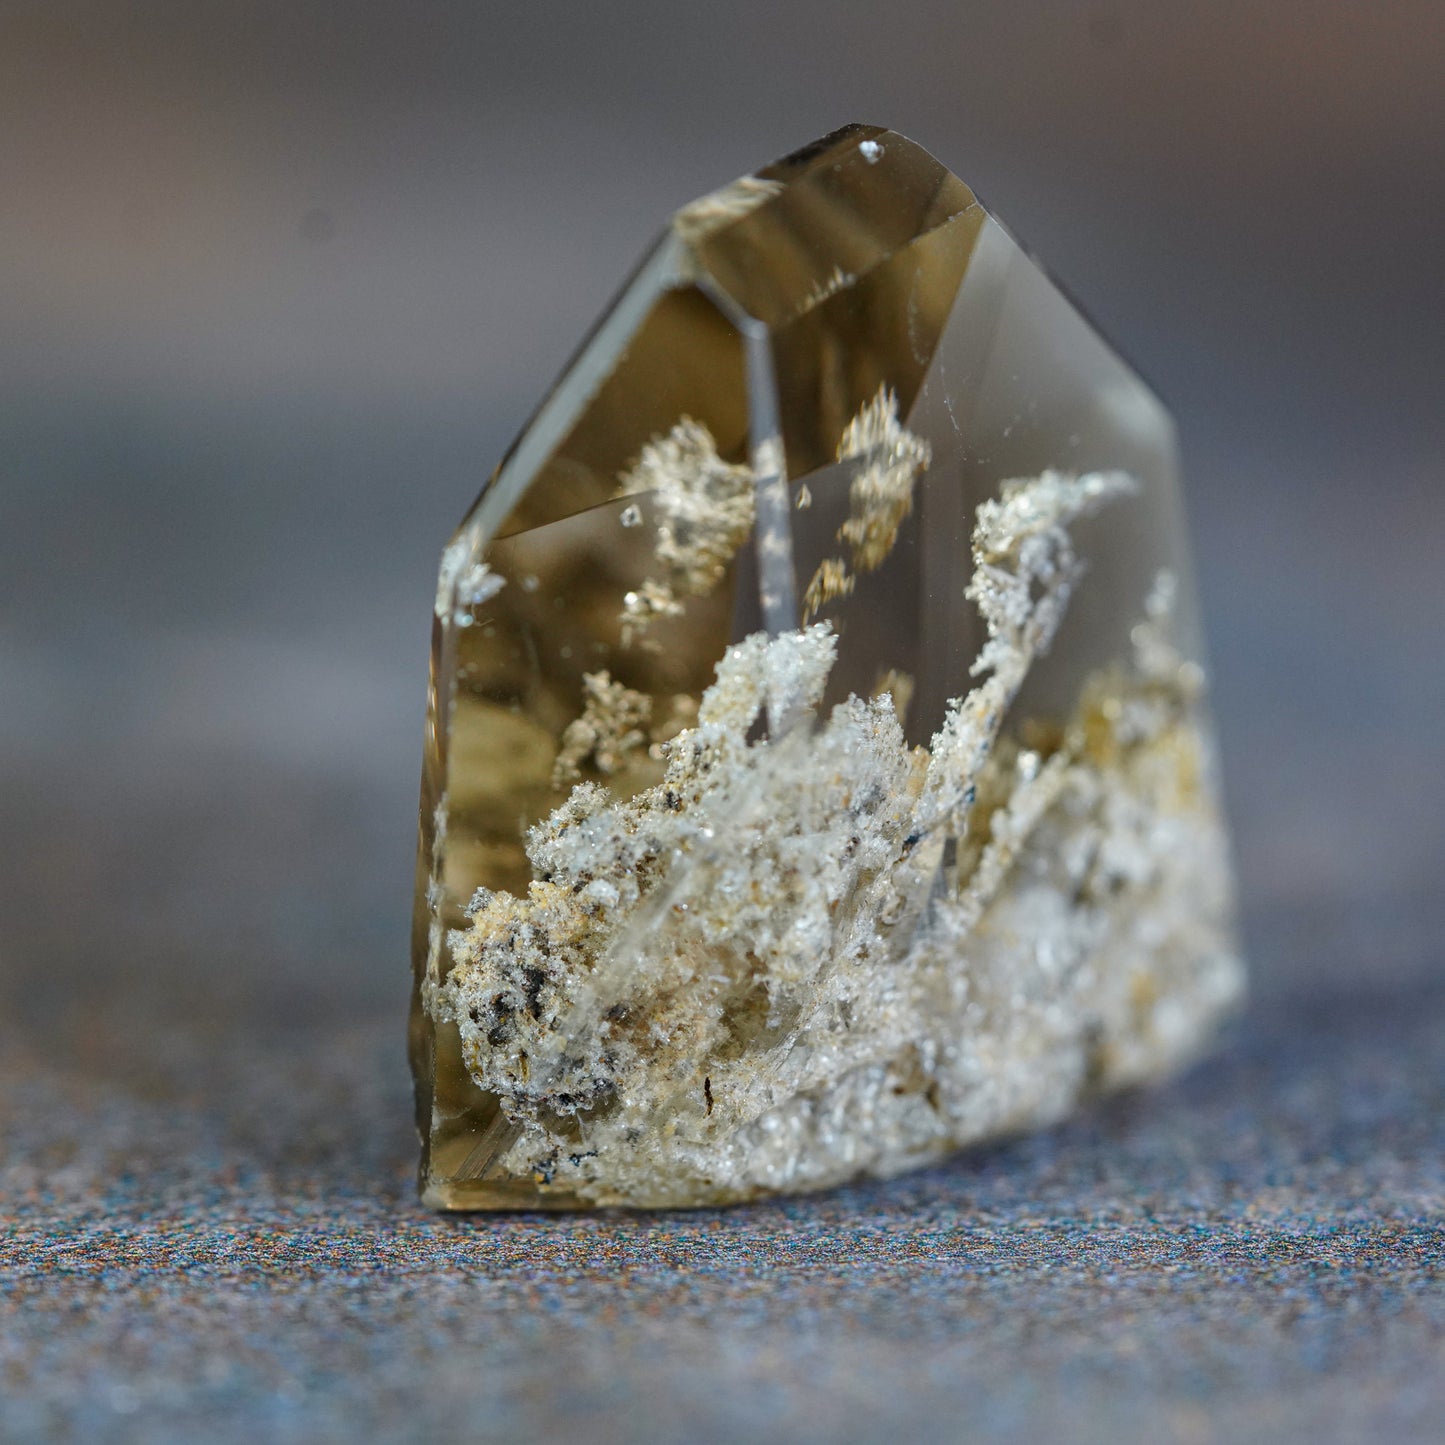 Enchanted Forest Garden Quartz Chisel Point - A Gateway to Nature's Whispers